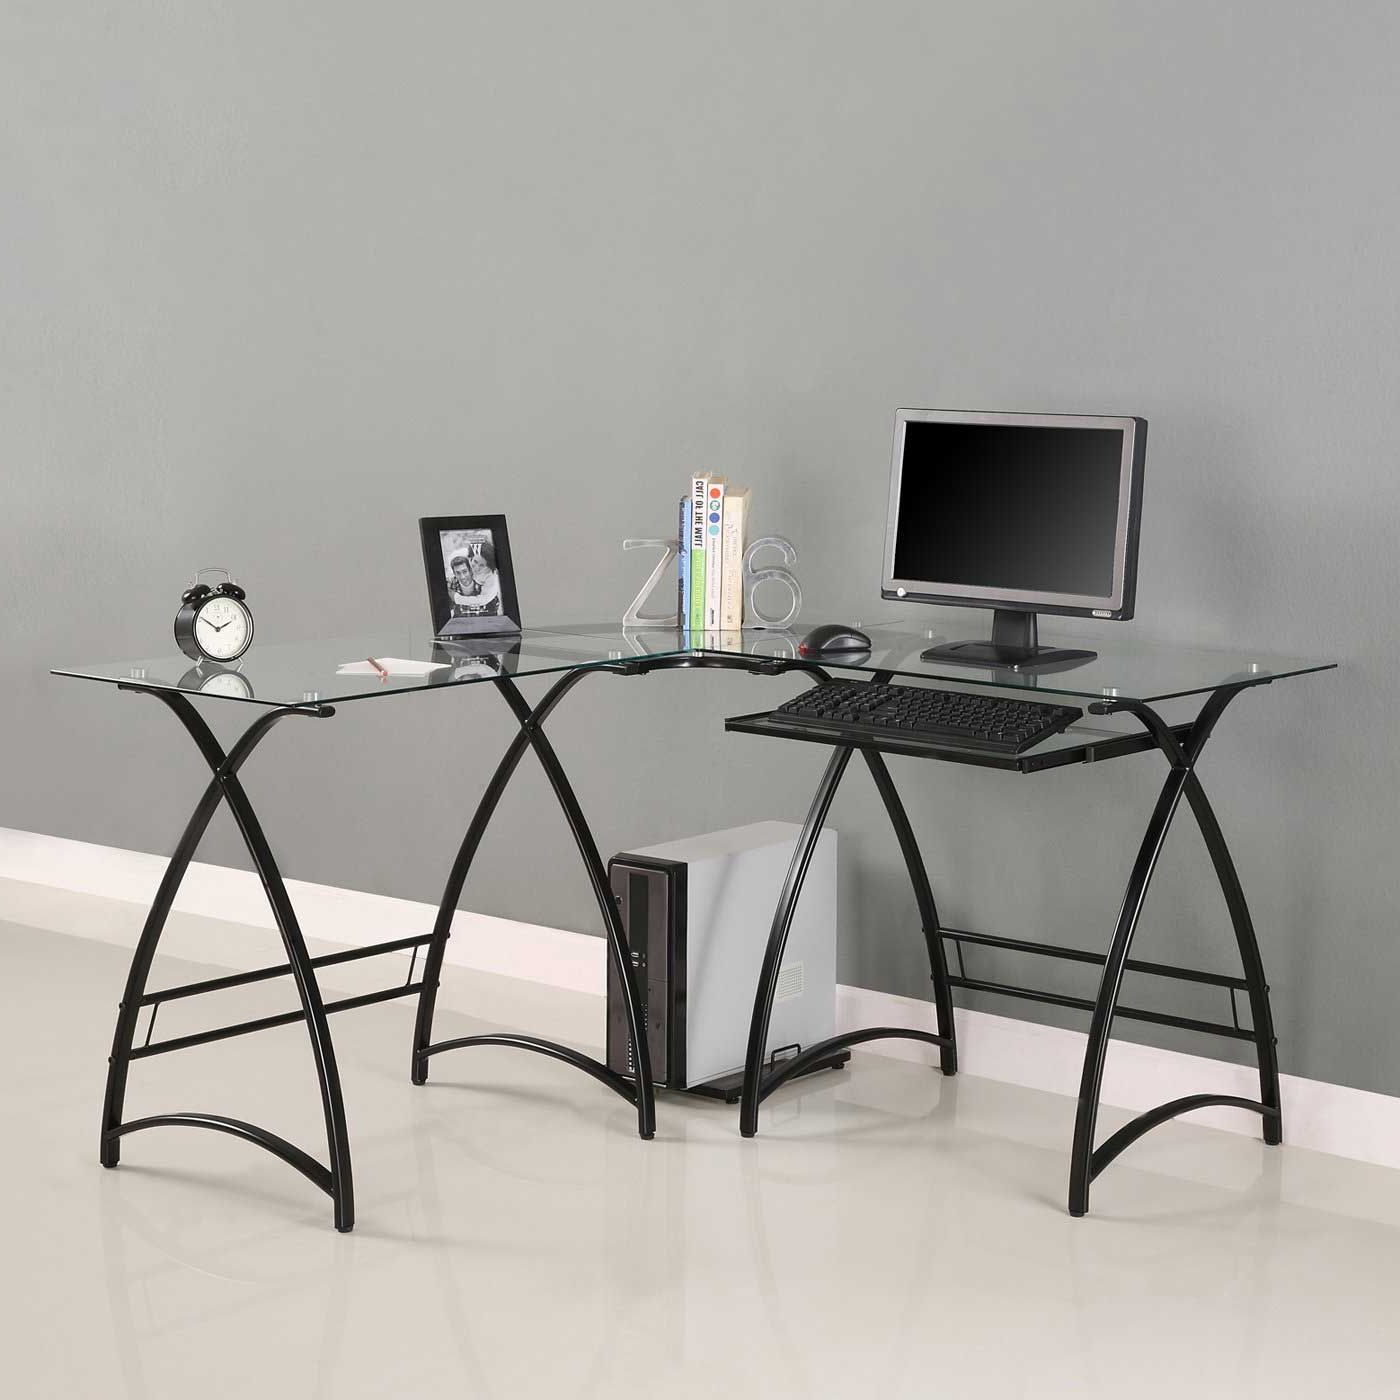 2019 Black Glass And Natural Wood Office Desks Inside Glass Office Desk Famous Manufacturer Reviews (View 8 of 15)